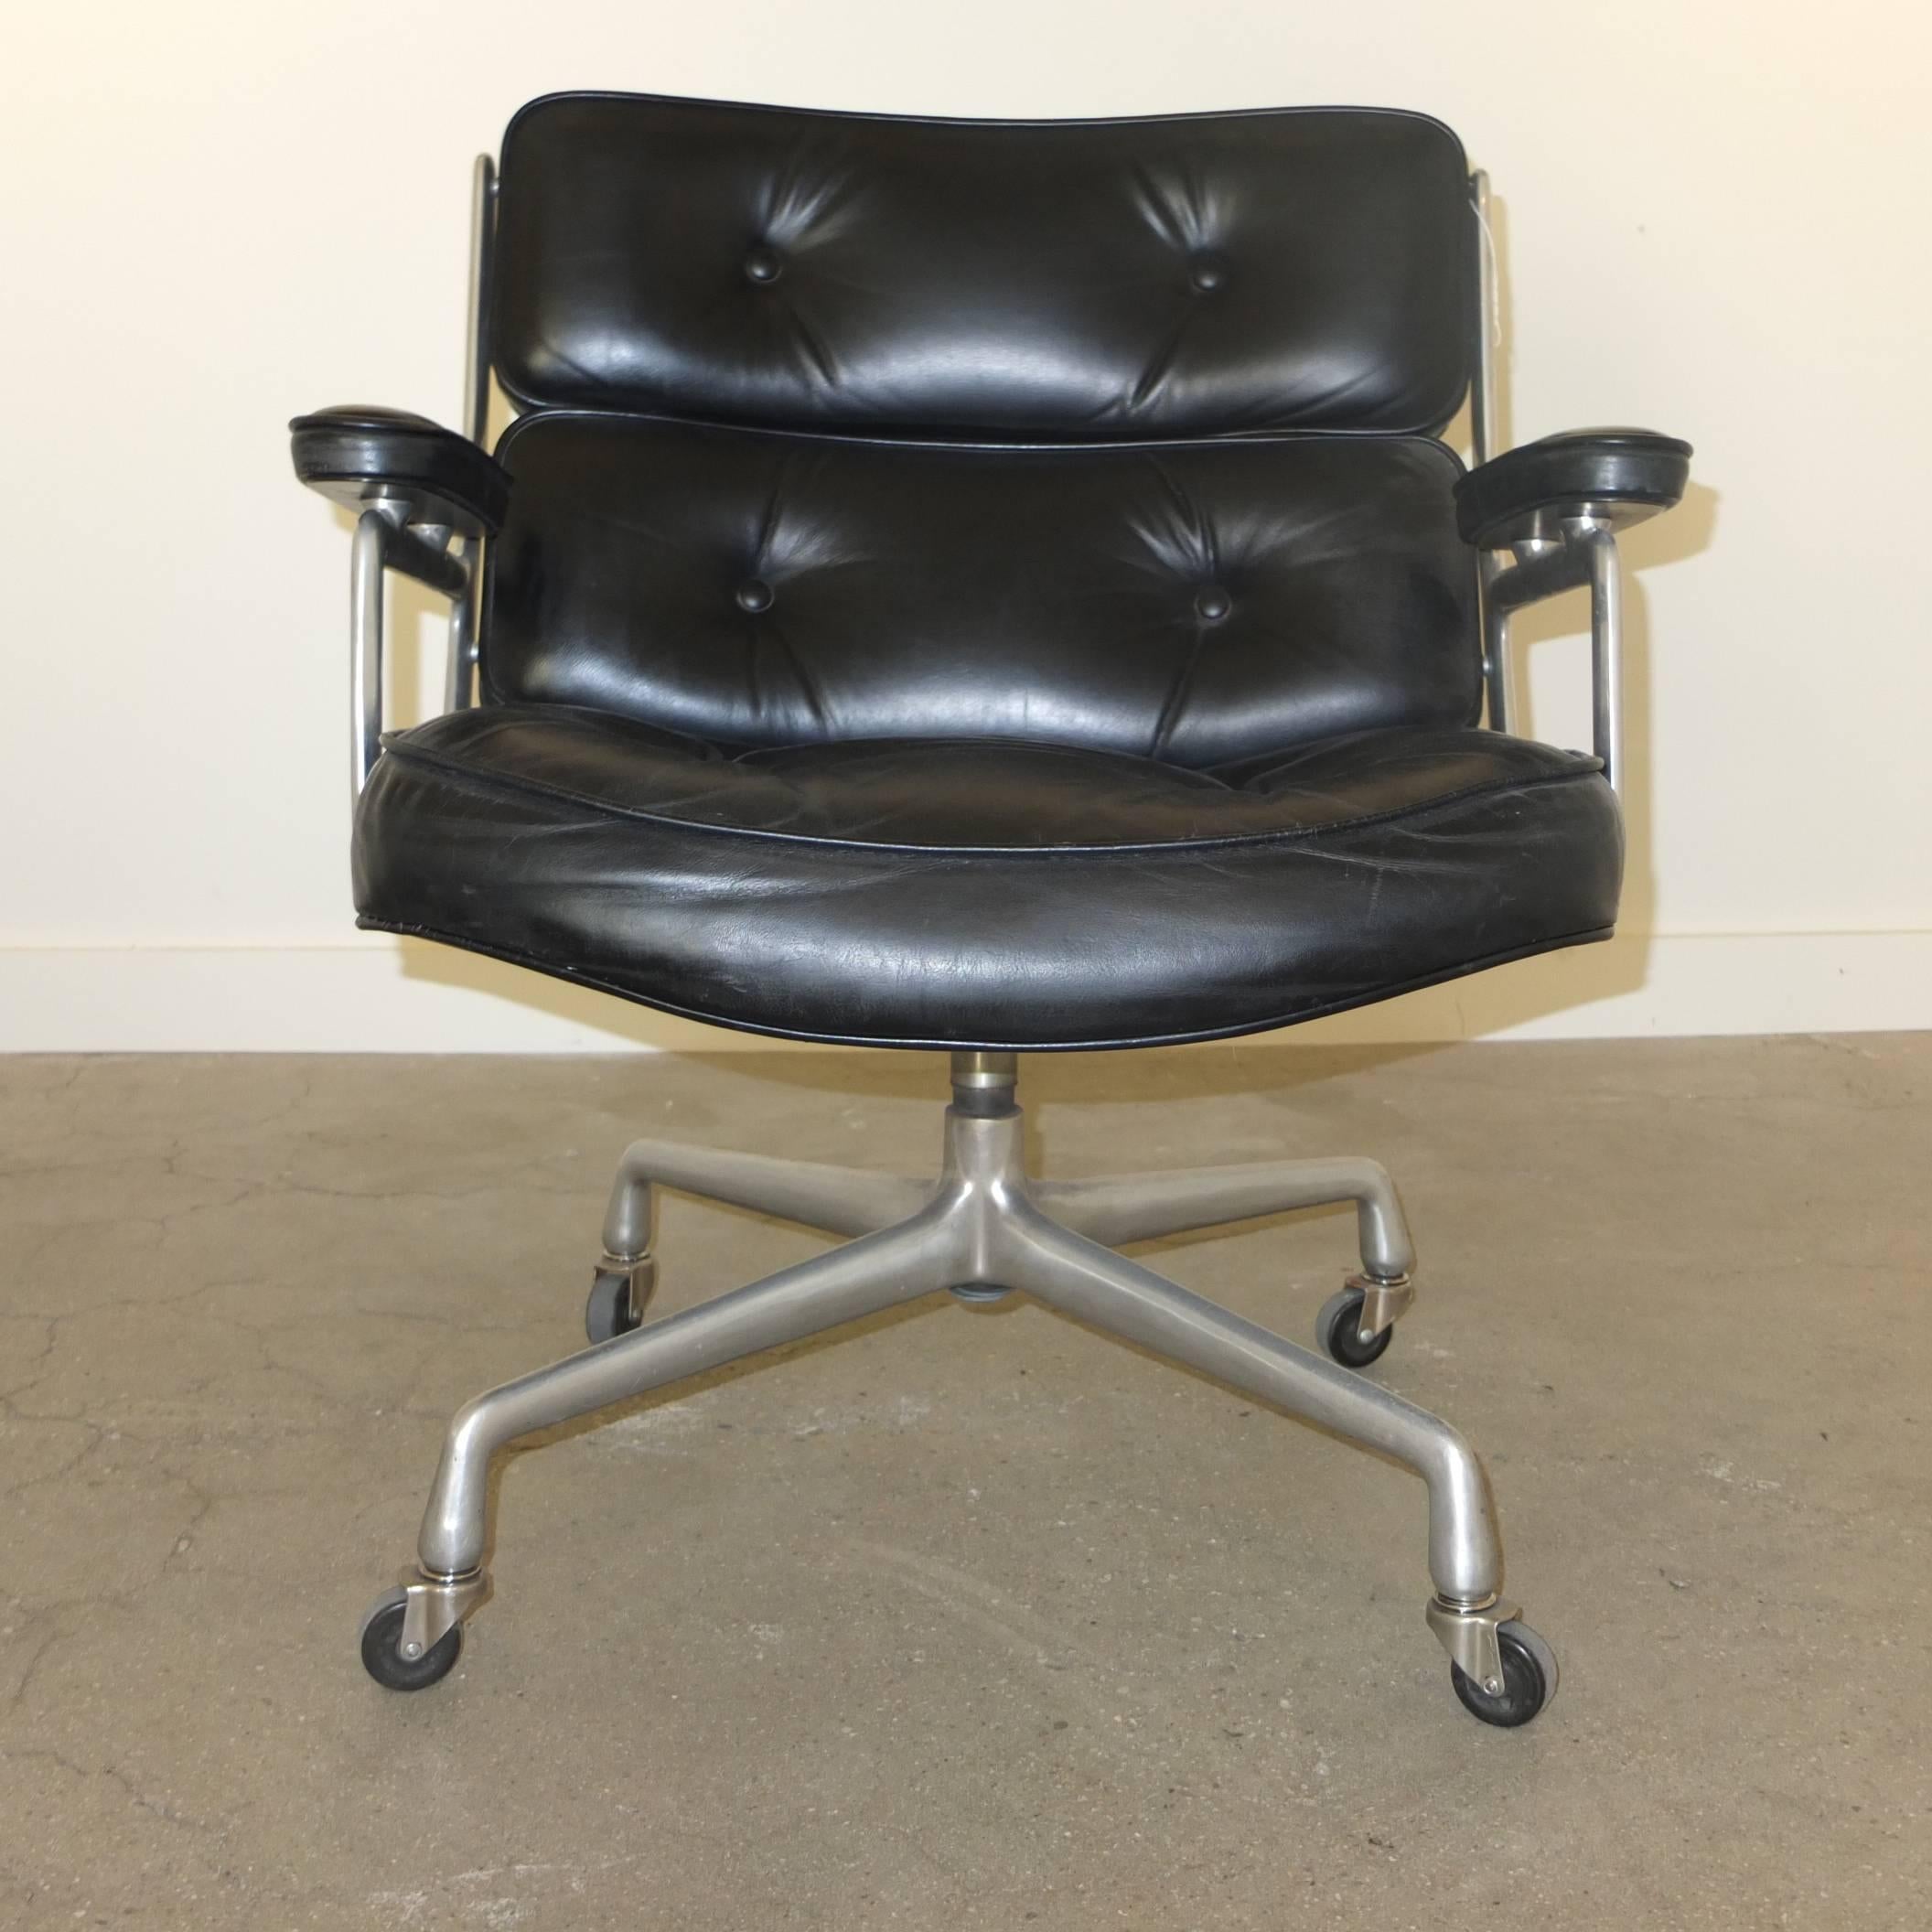 Original 1960s model of Eames' Lobby chair for the Time Life building designed by Herman Miller. Original black leather has been cleaned and conditioned by Hub Leather. Early wheels without fenders (can be removed if preferred). This is the shorter